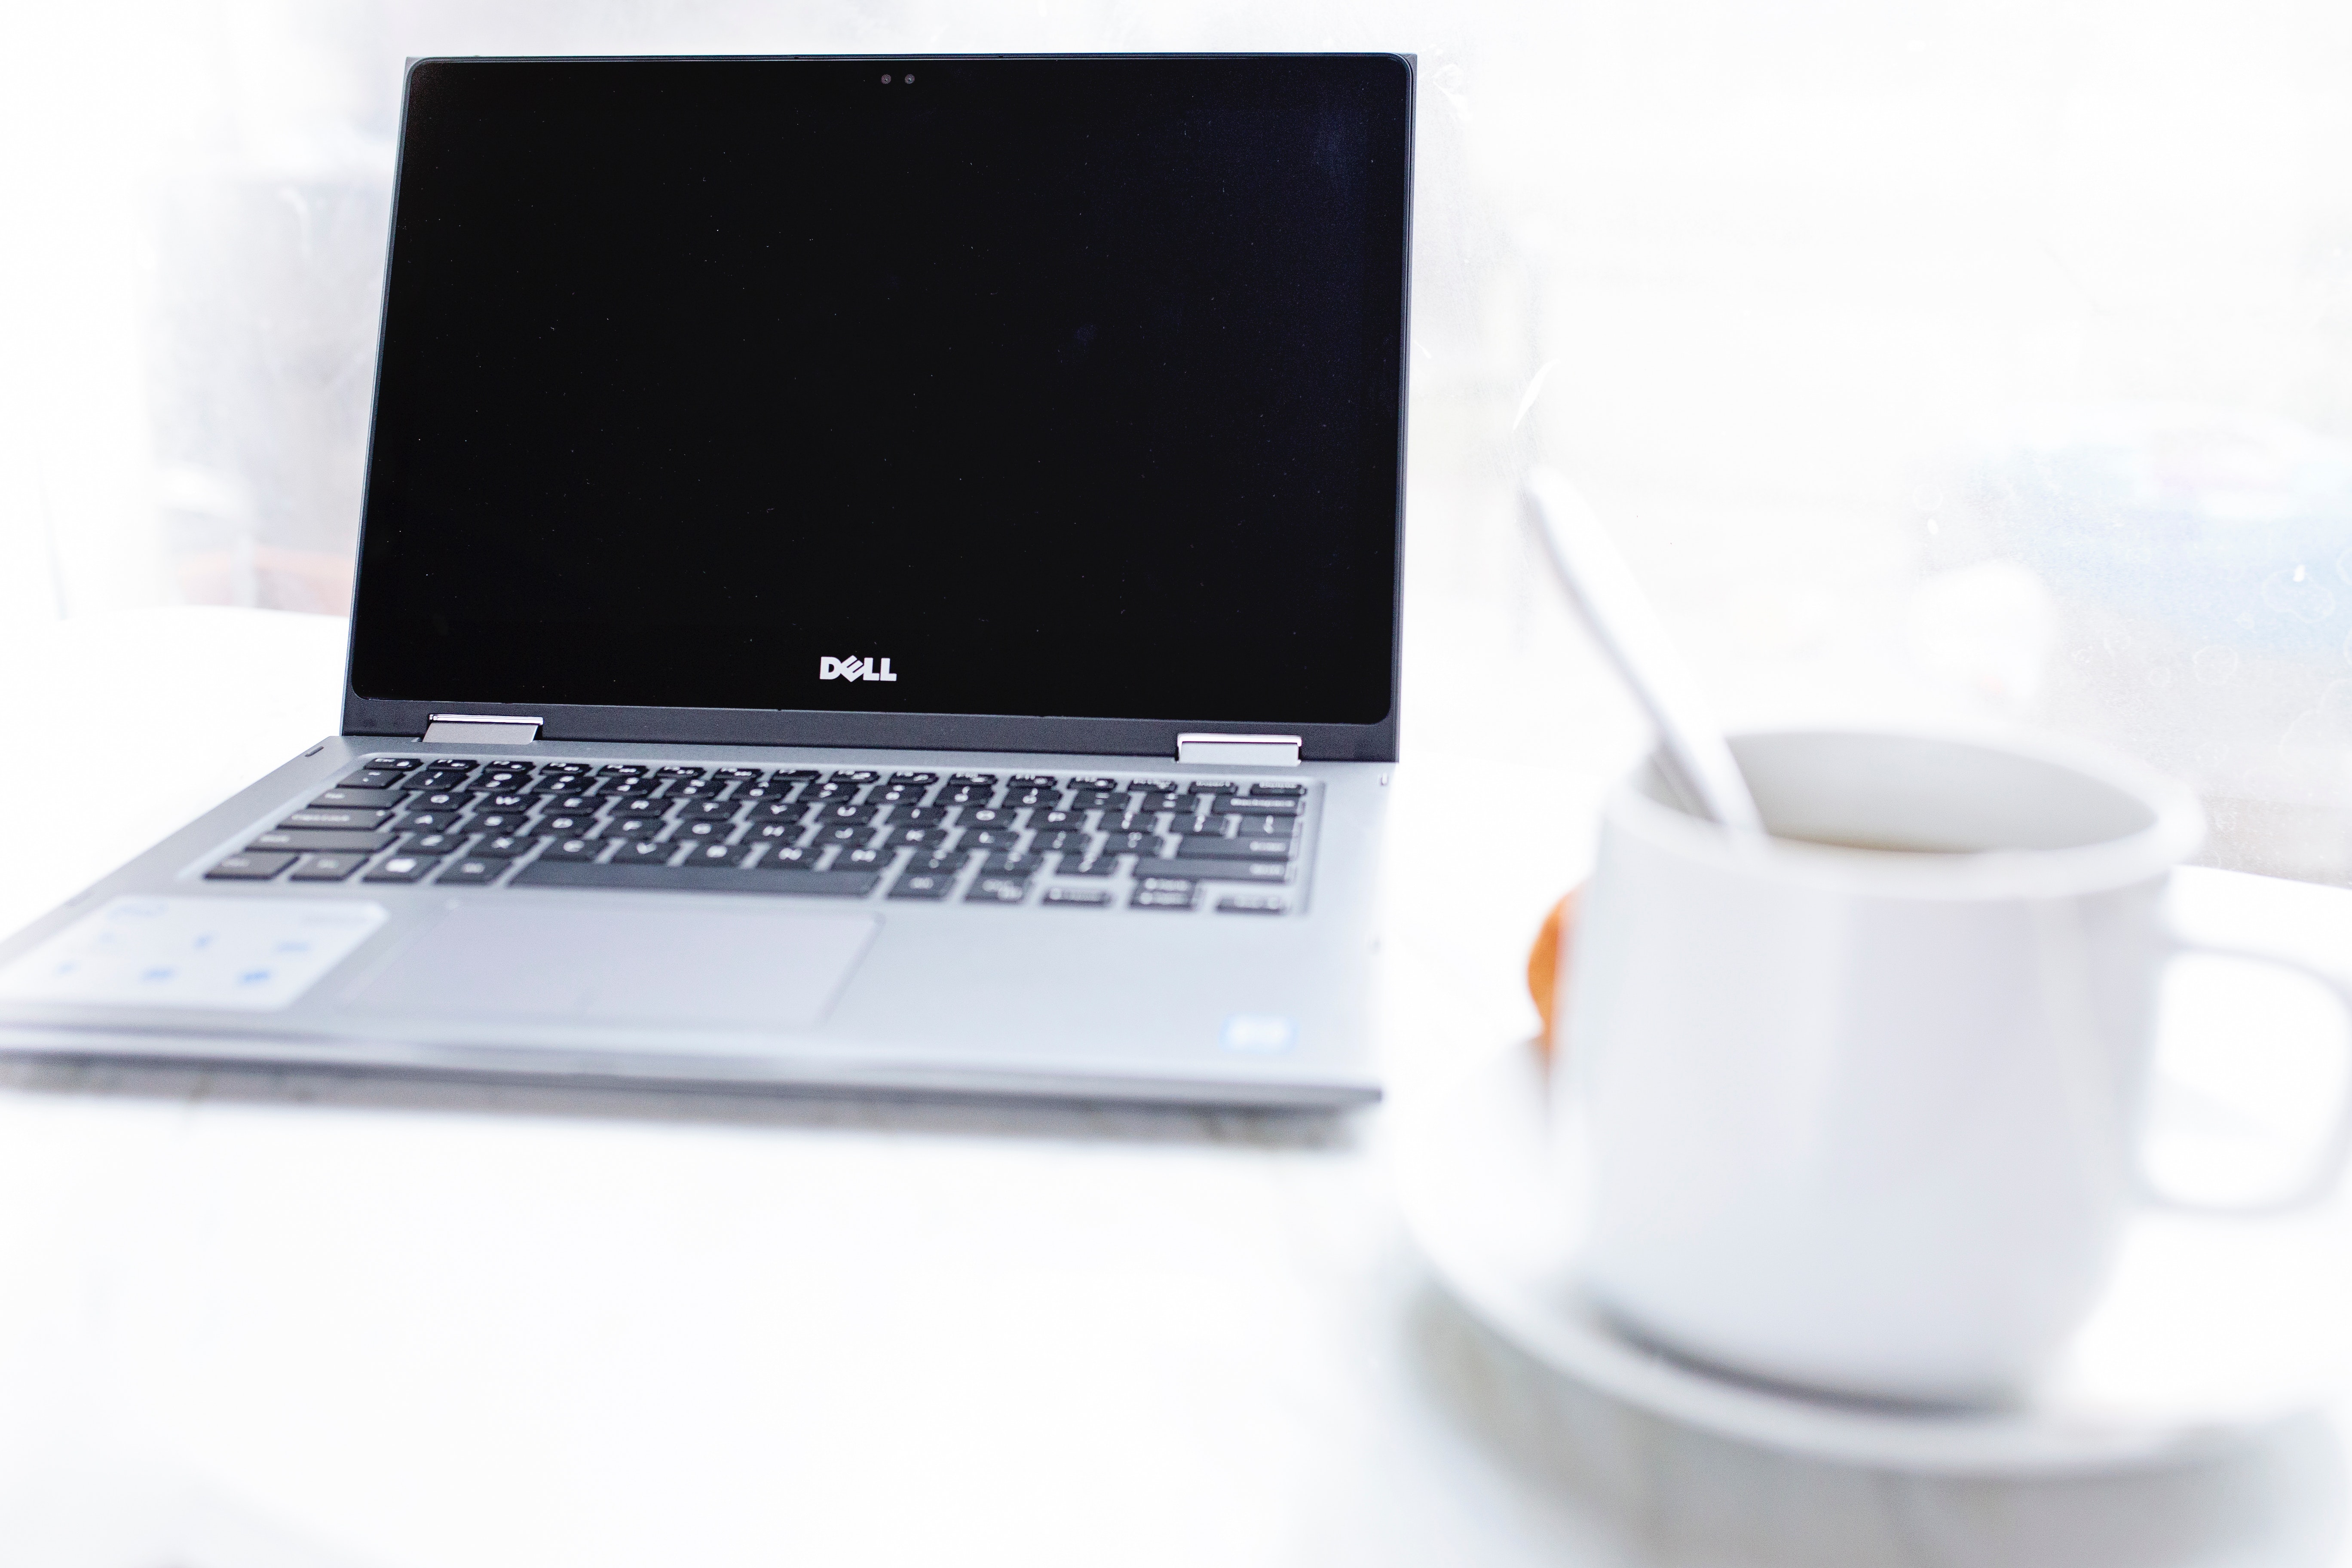 Dell laptop in front of cup of coffee photo